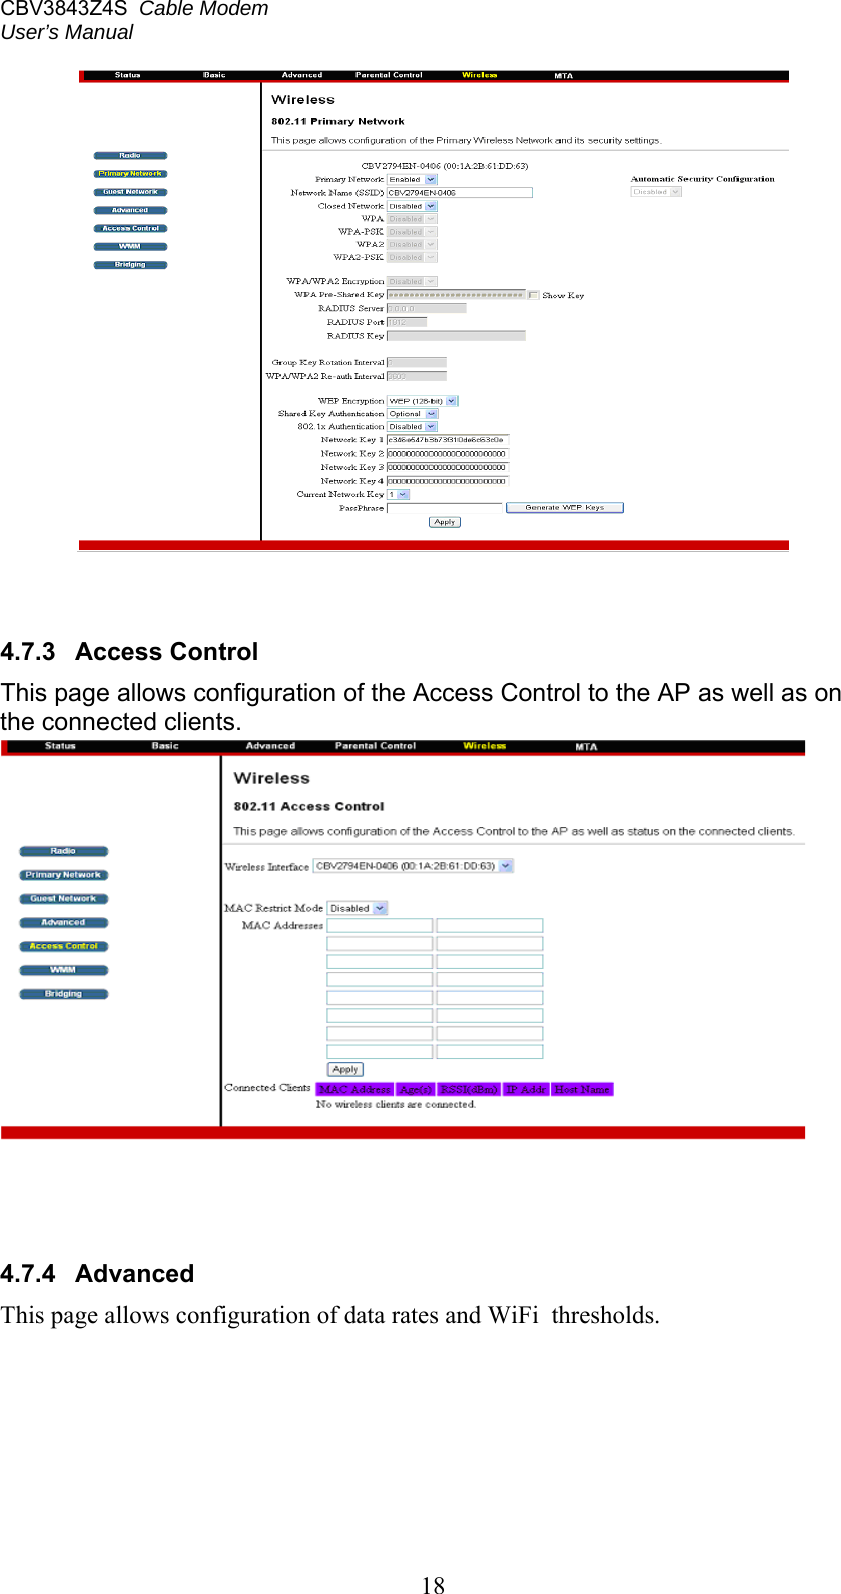 CBV3843Z4S  Cable Modem  User’s Manual   18     4.7.3  Access Control This page allows configuration of the Access Control to the AP as well as on the connected clients.      4.7.4  Advanced  This page allows configuration of data rates and WiFi  thresholds. 